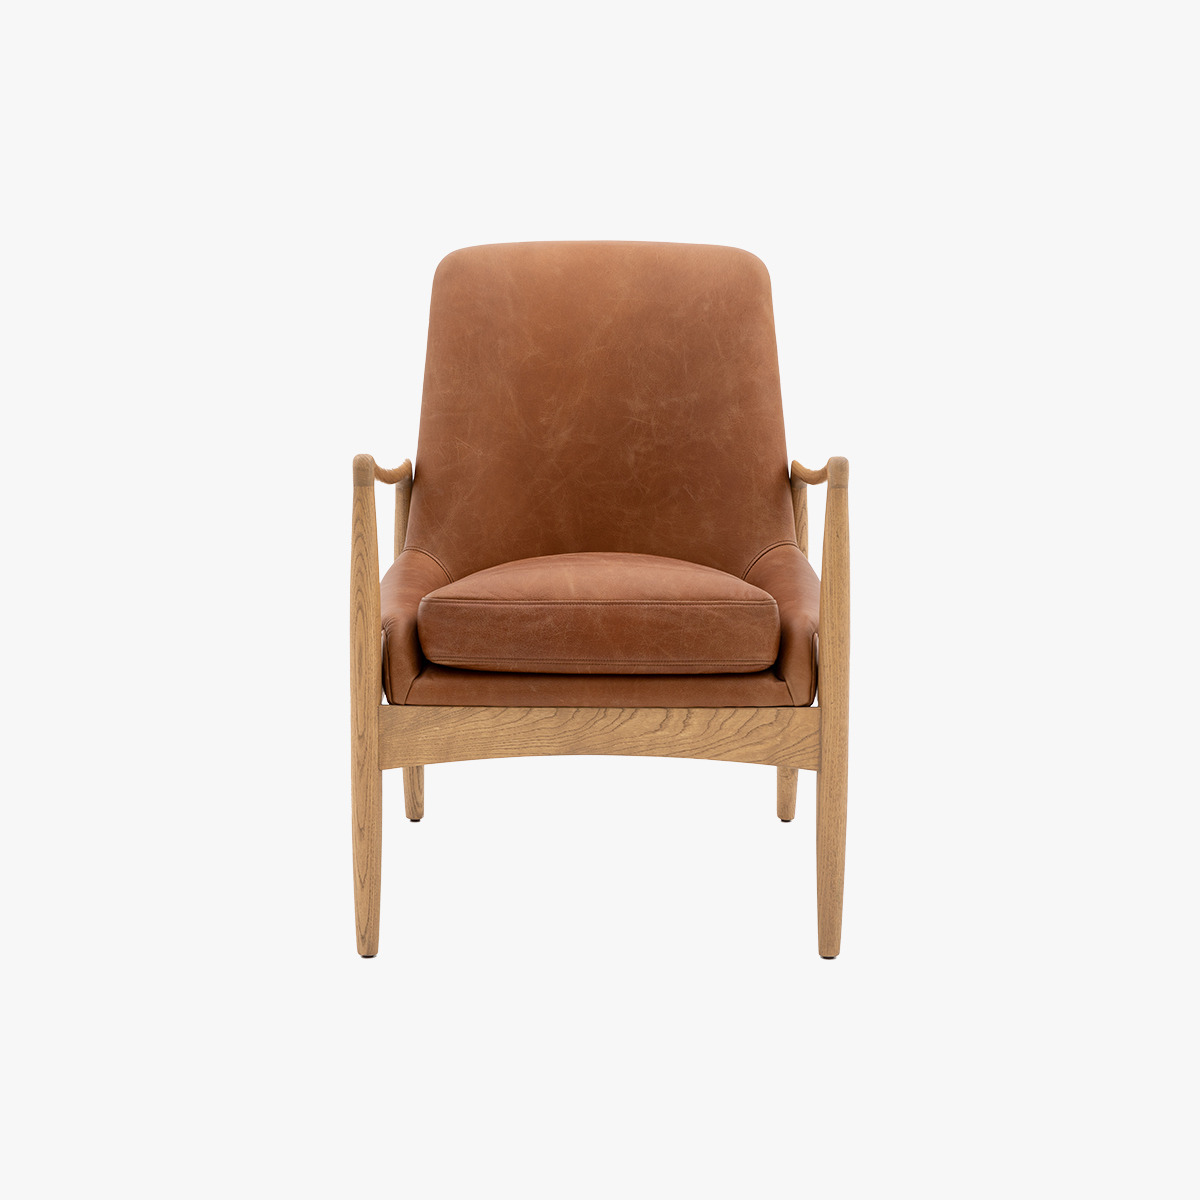 Dandy Armchair in Brown Leather